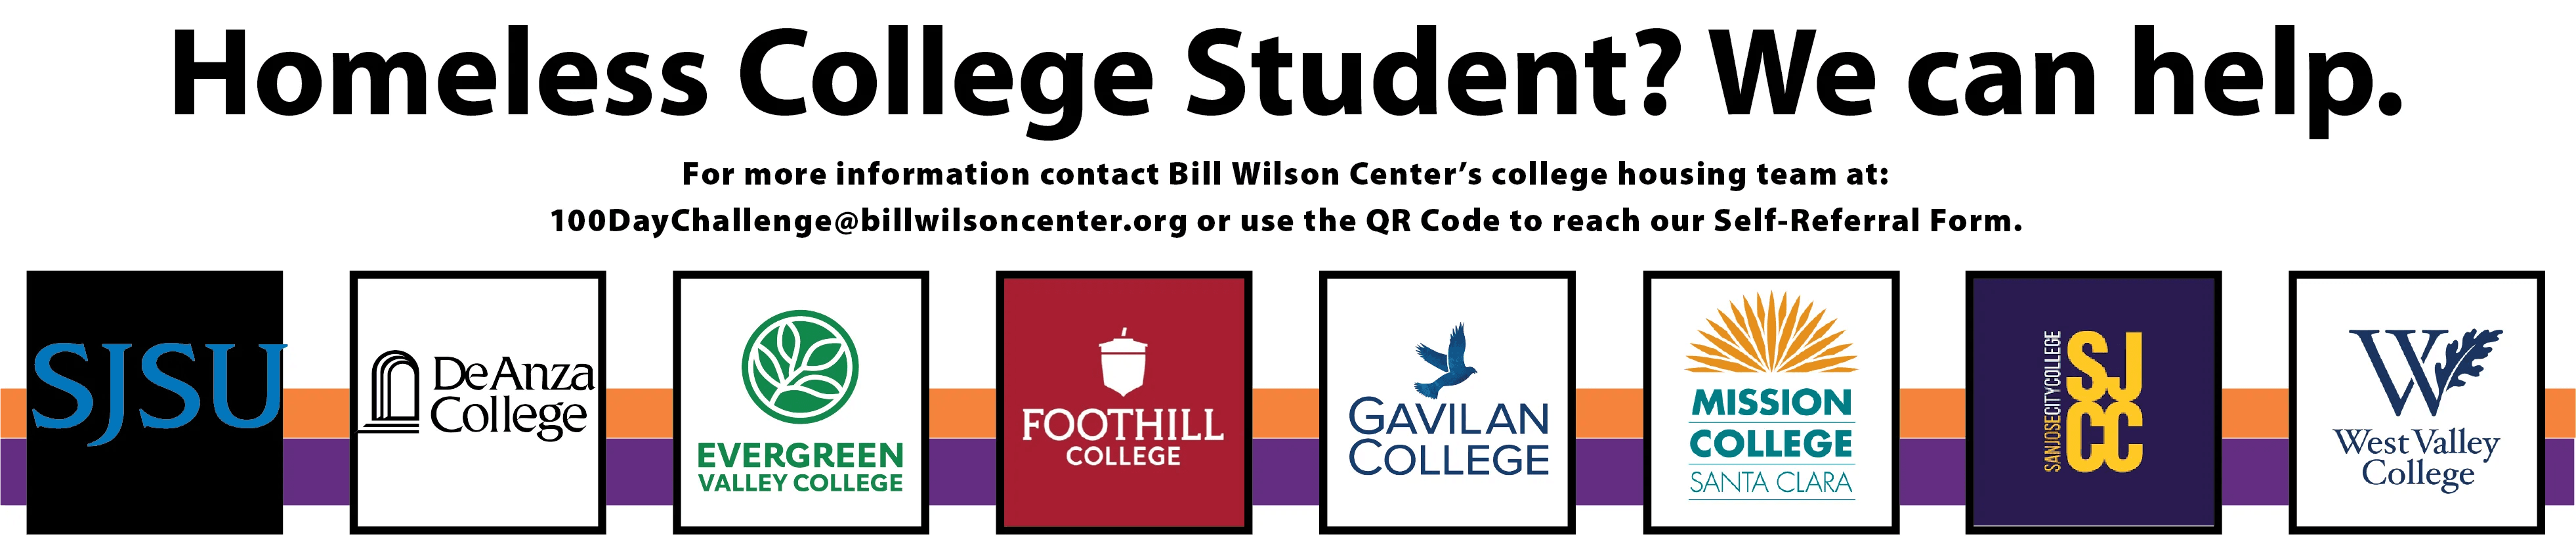 Homeless College Student? We can help.